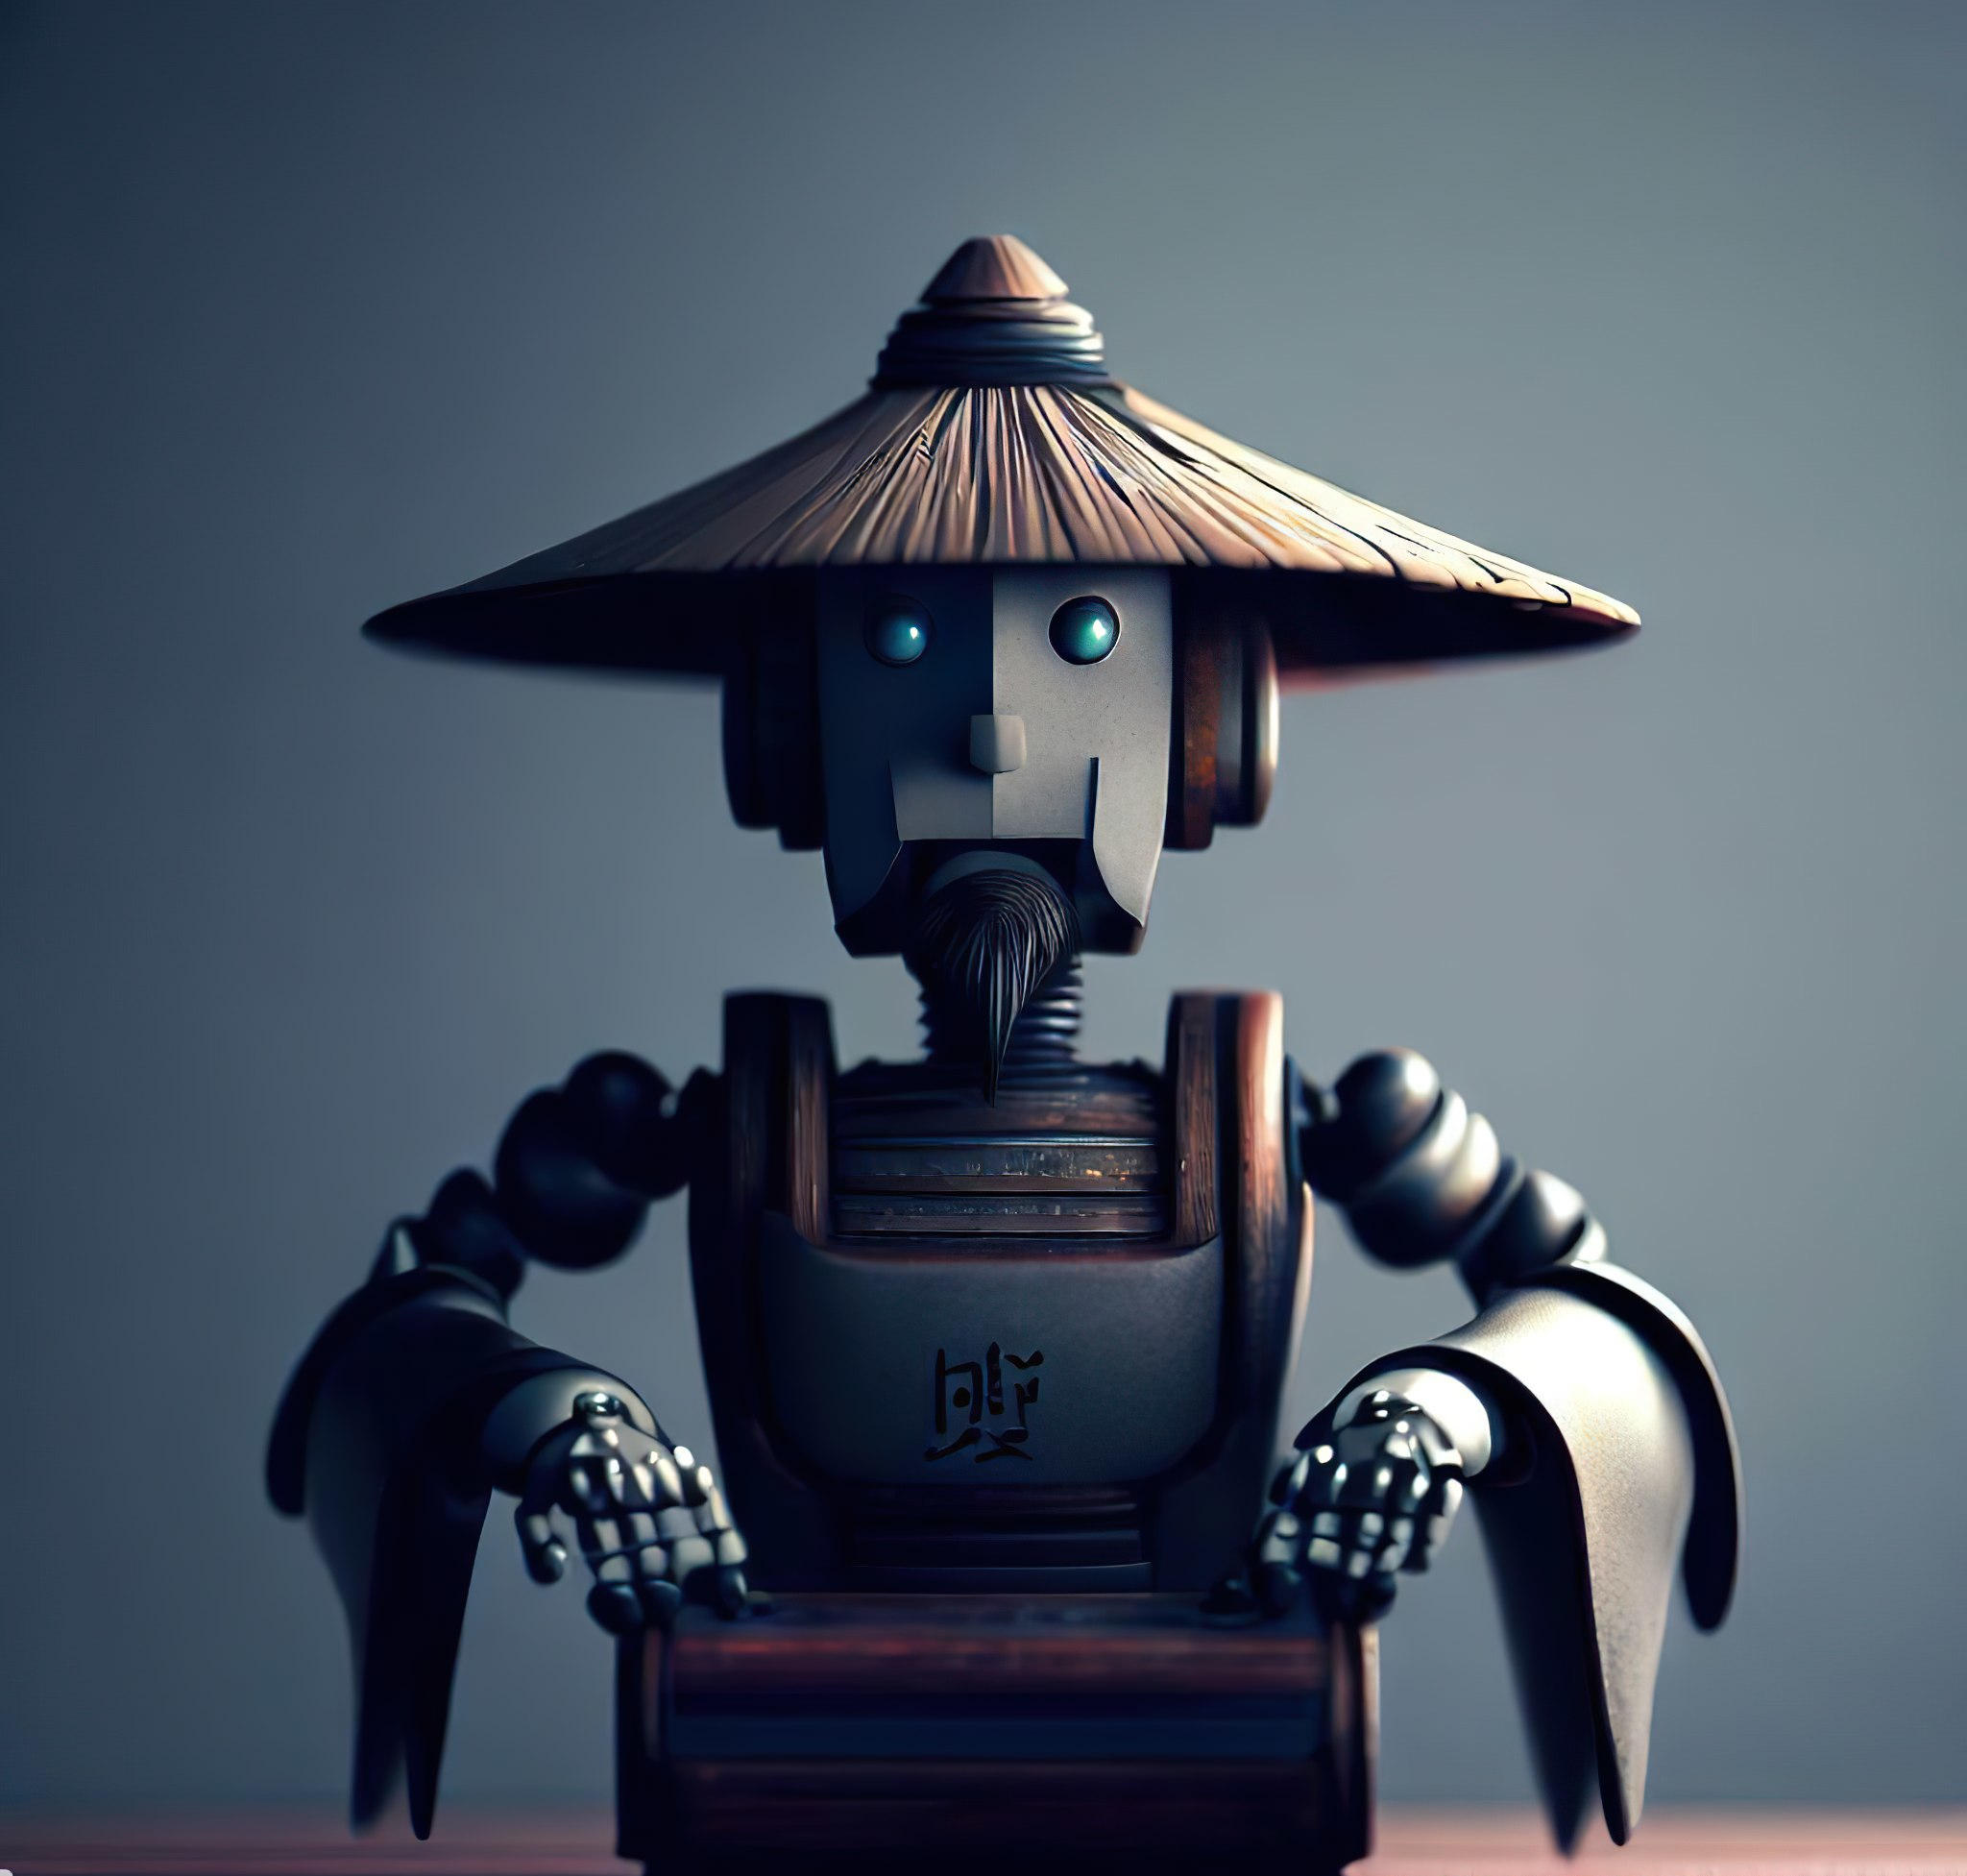 Giving Robots Rights Is a Bad Idea – But Confucianism Offers an Alternative